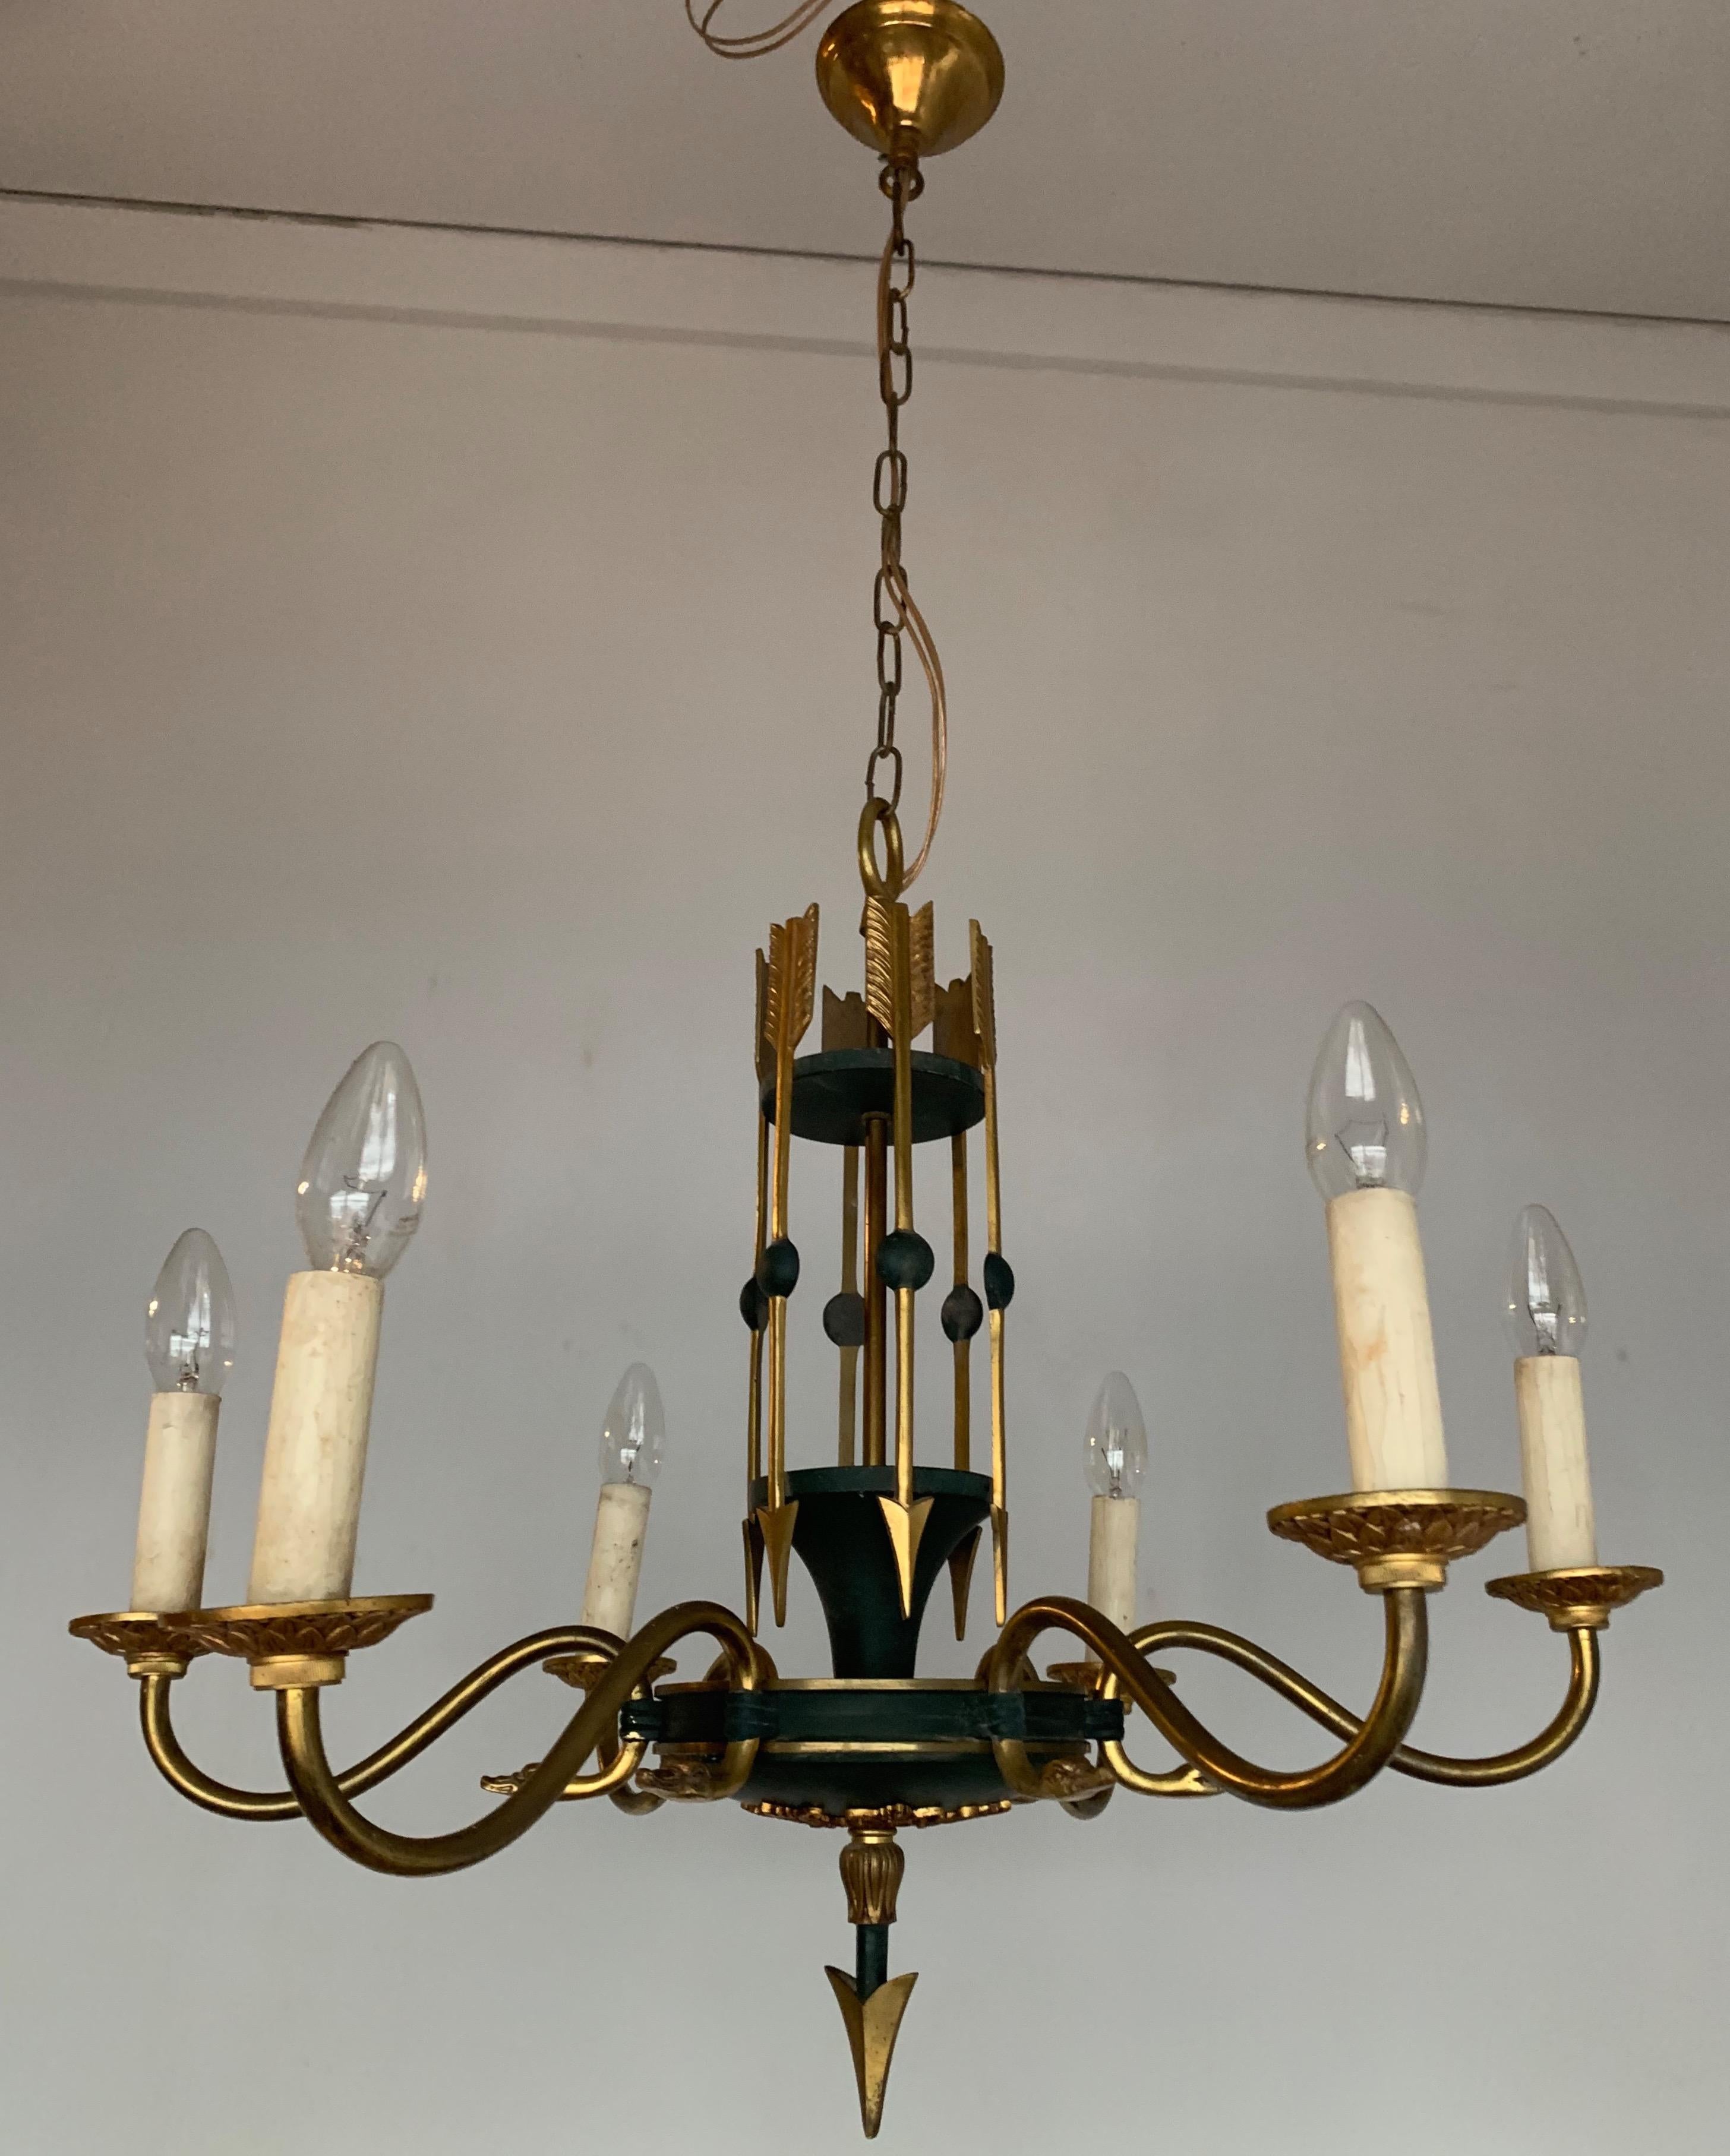 Stylish Empire Revival Six-Light Pendant Chandelier with Swan Heads and Arrows For Sale 6